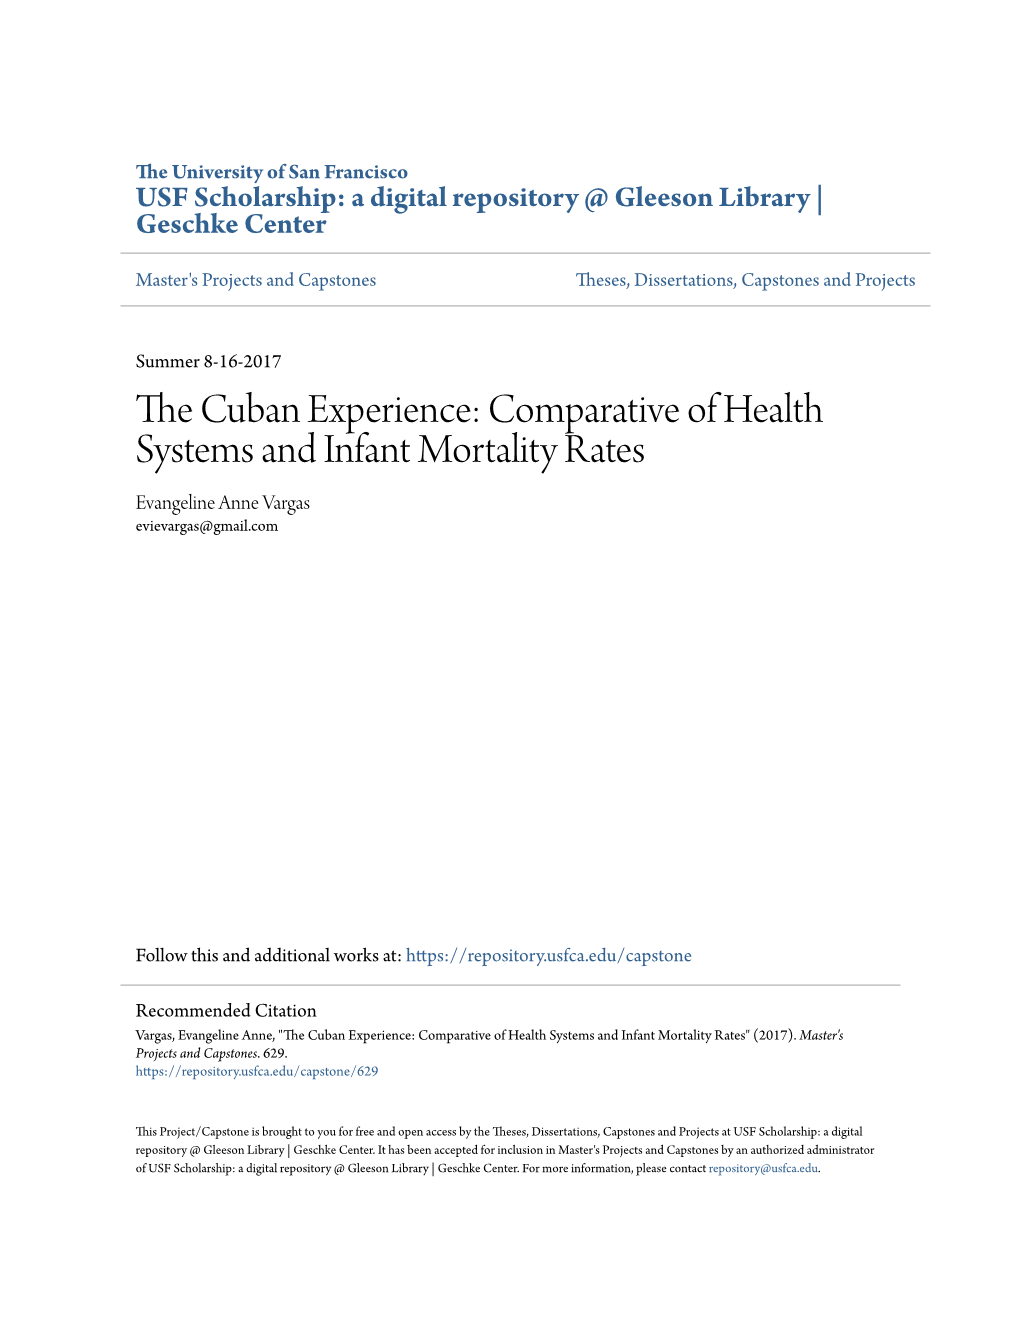 The Cuban Experience: Comparative of Health Systems and Infant Mortality Rates